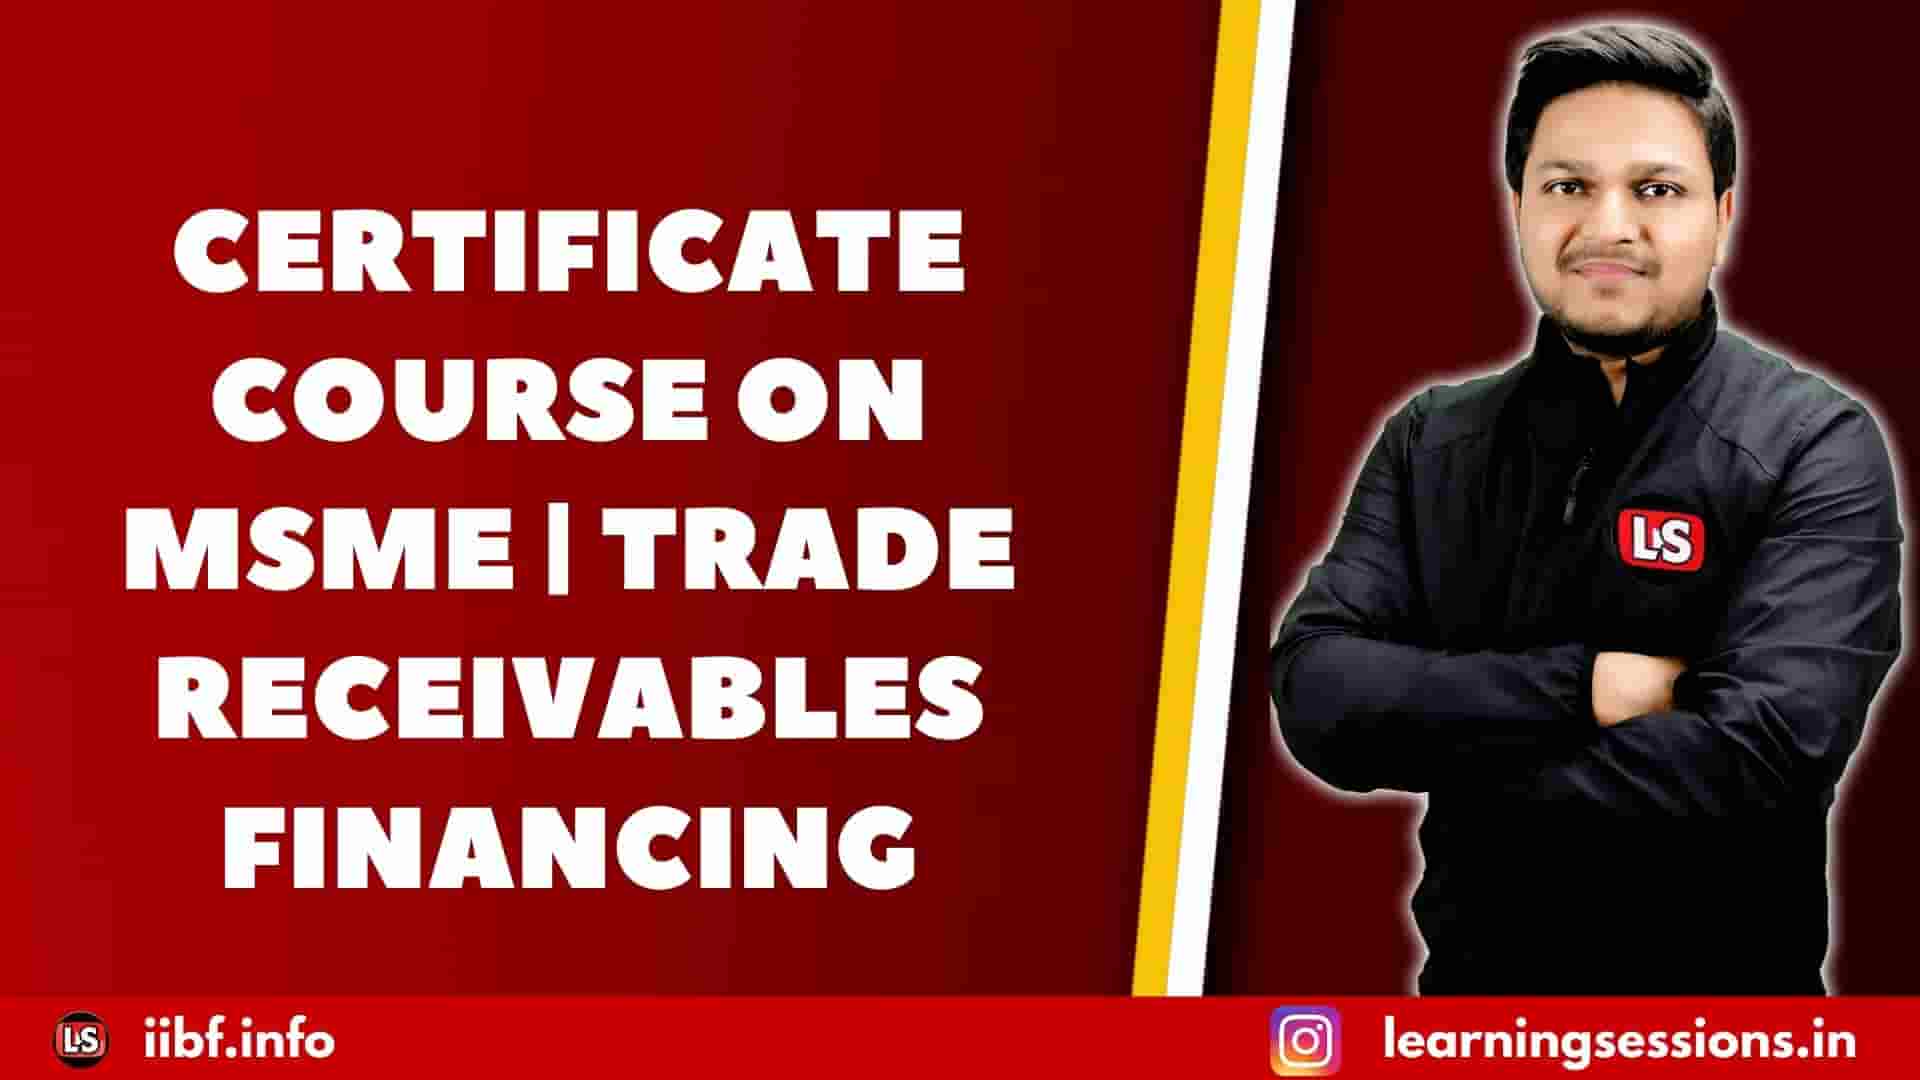 CERTIFICATE COURSE ON MSME | TRADE RECEIVABLES FINANCING